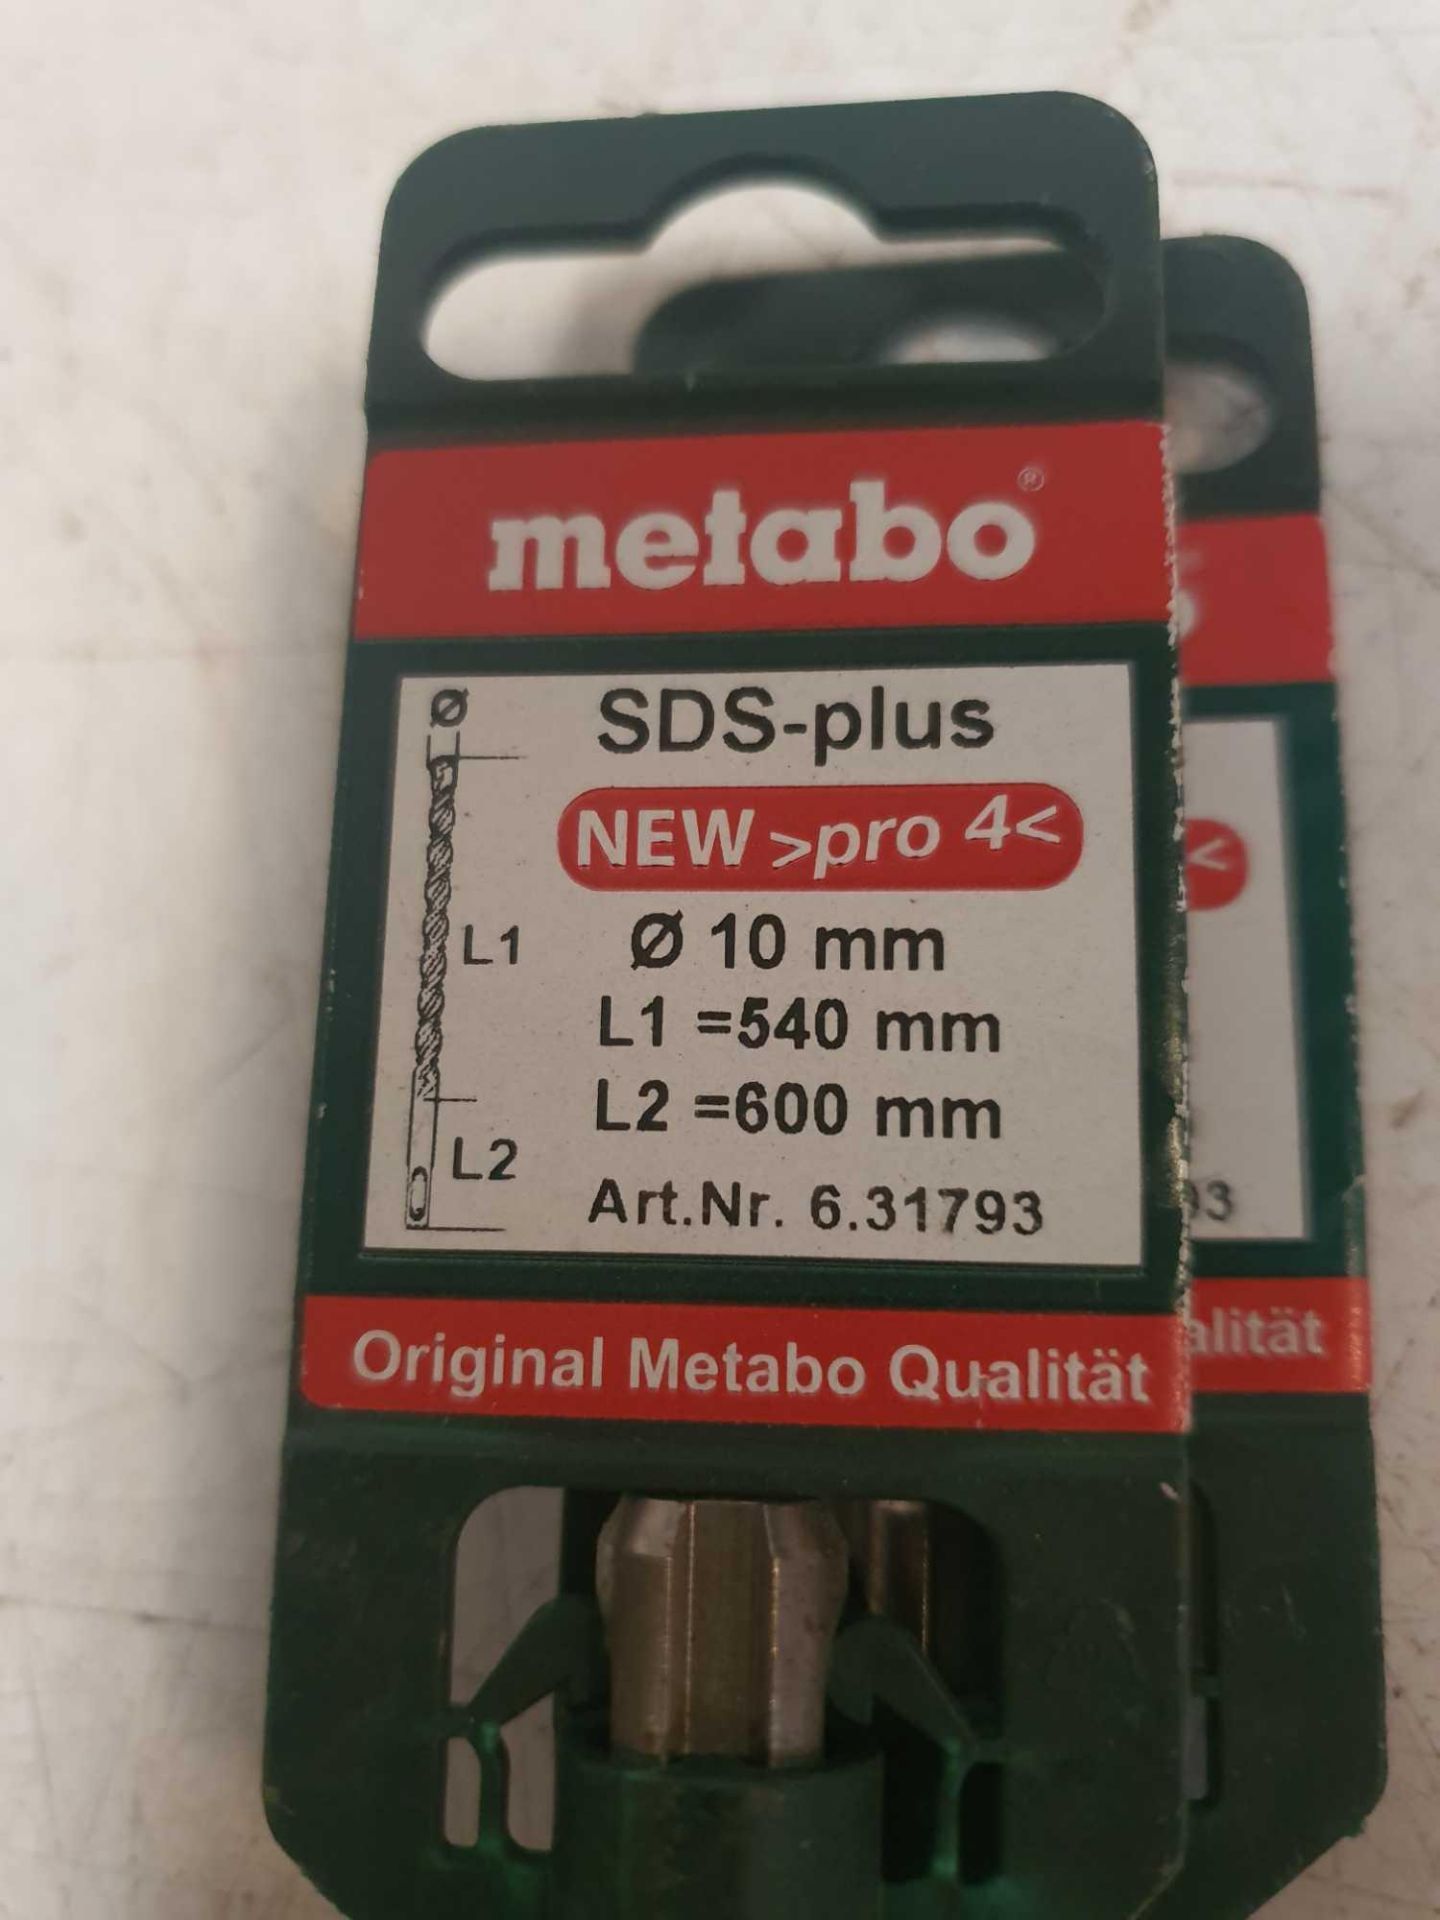 Metabo sds plus 10mm drill bit x2 - Image 2 of 2